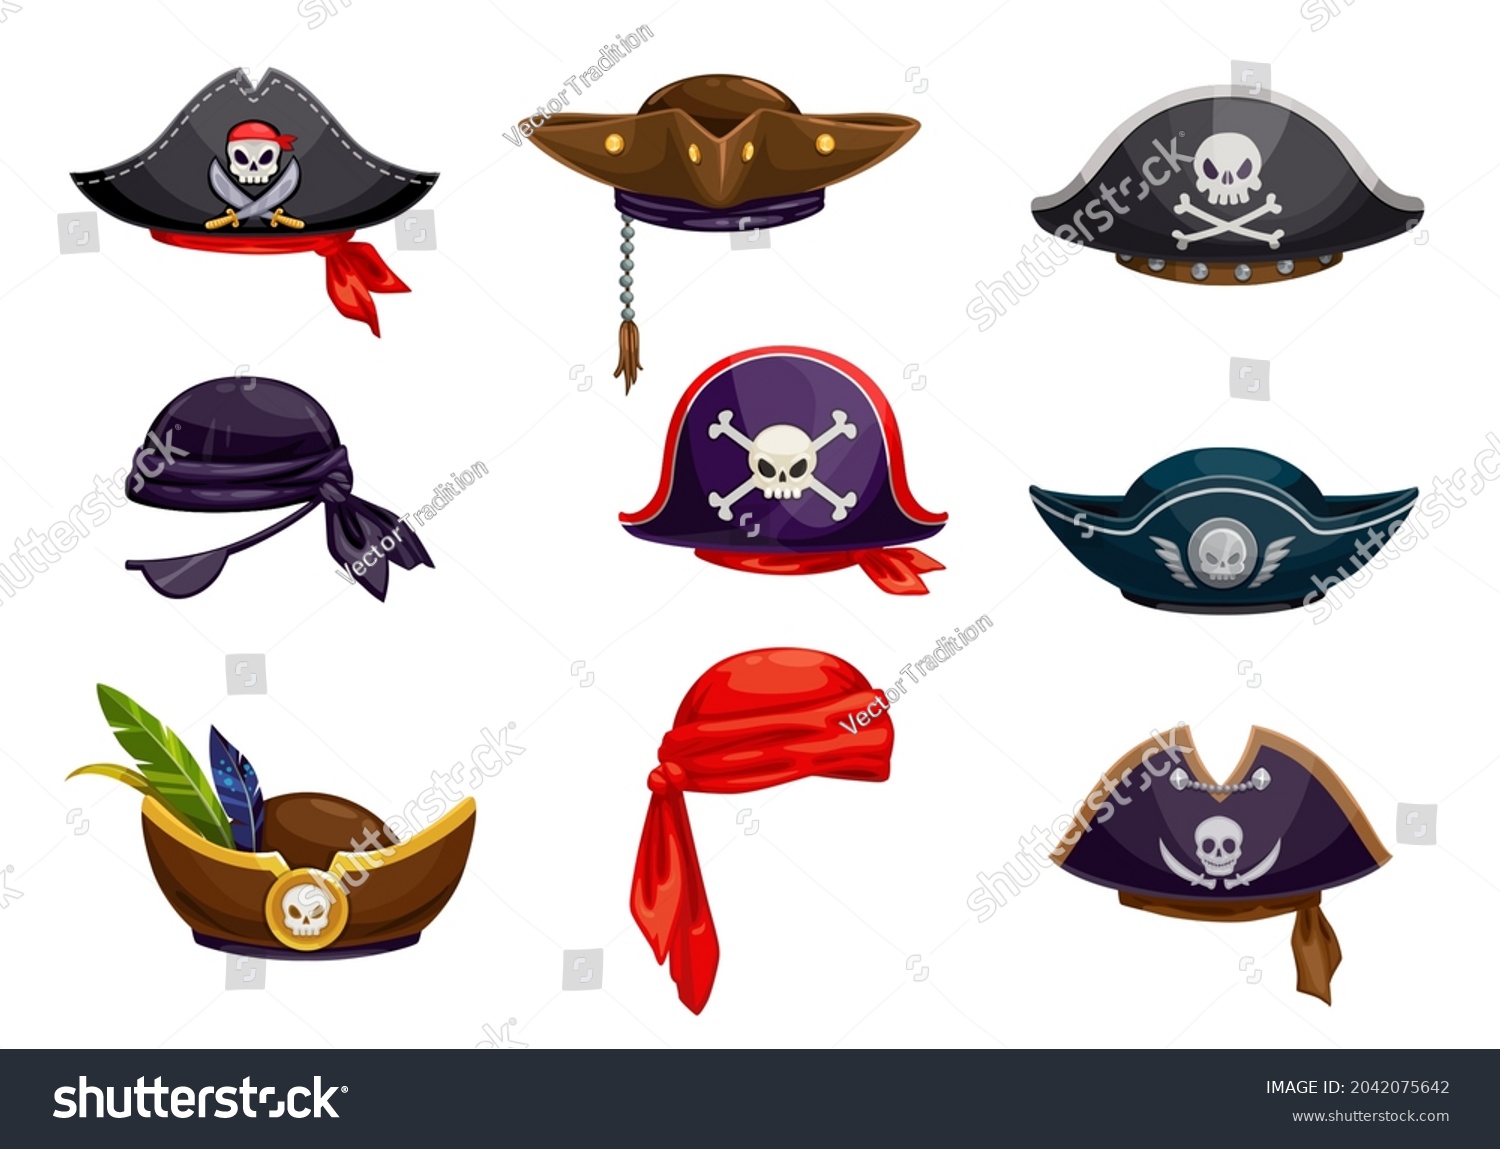 SVG of Cartoon pirate bandana and sailor tricorn or cocked hat set, vector icons. Pirate buccaneer or corsair carnival costume hats with skull and crossbones of merry roger flag, sabers and feathers svg